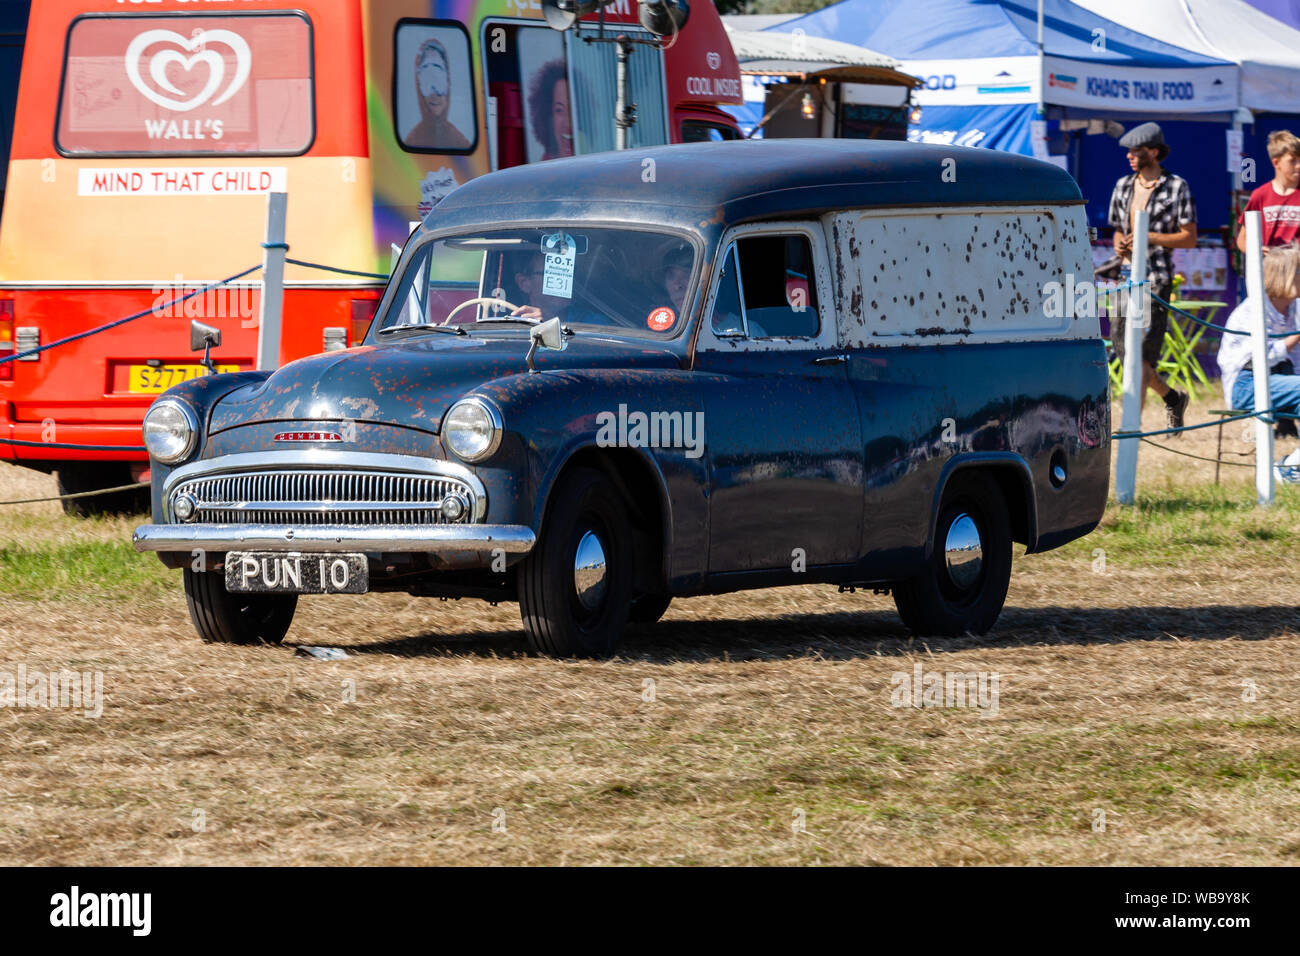 Commer Van High Resolution Stock Photography and Images - Alamy